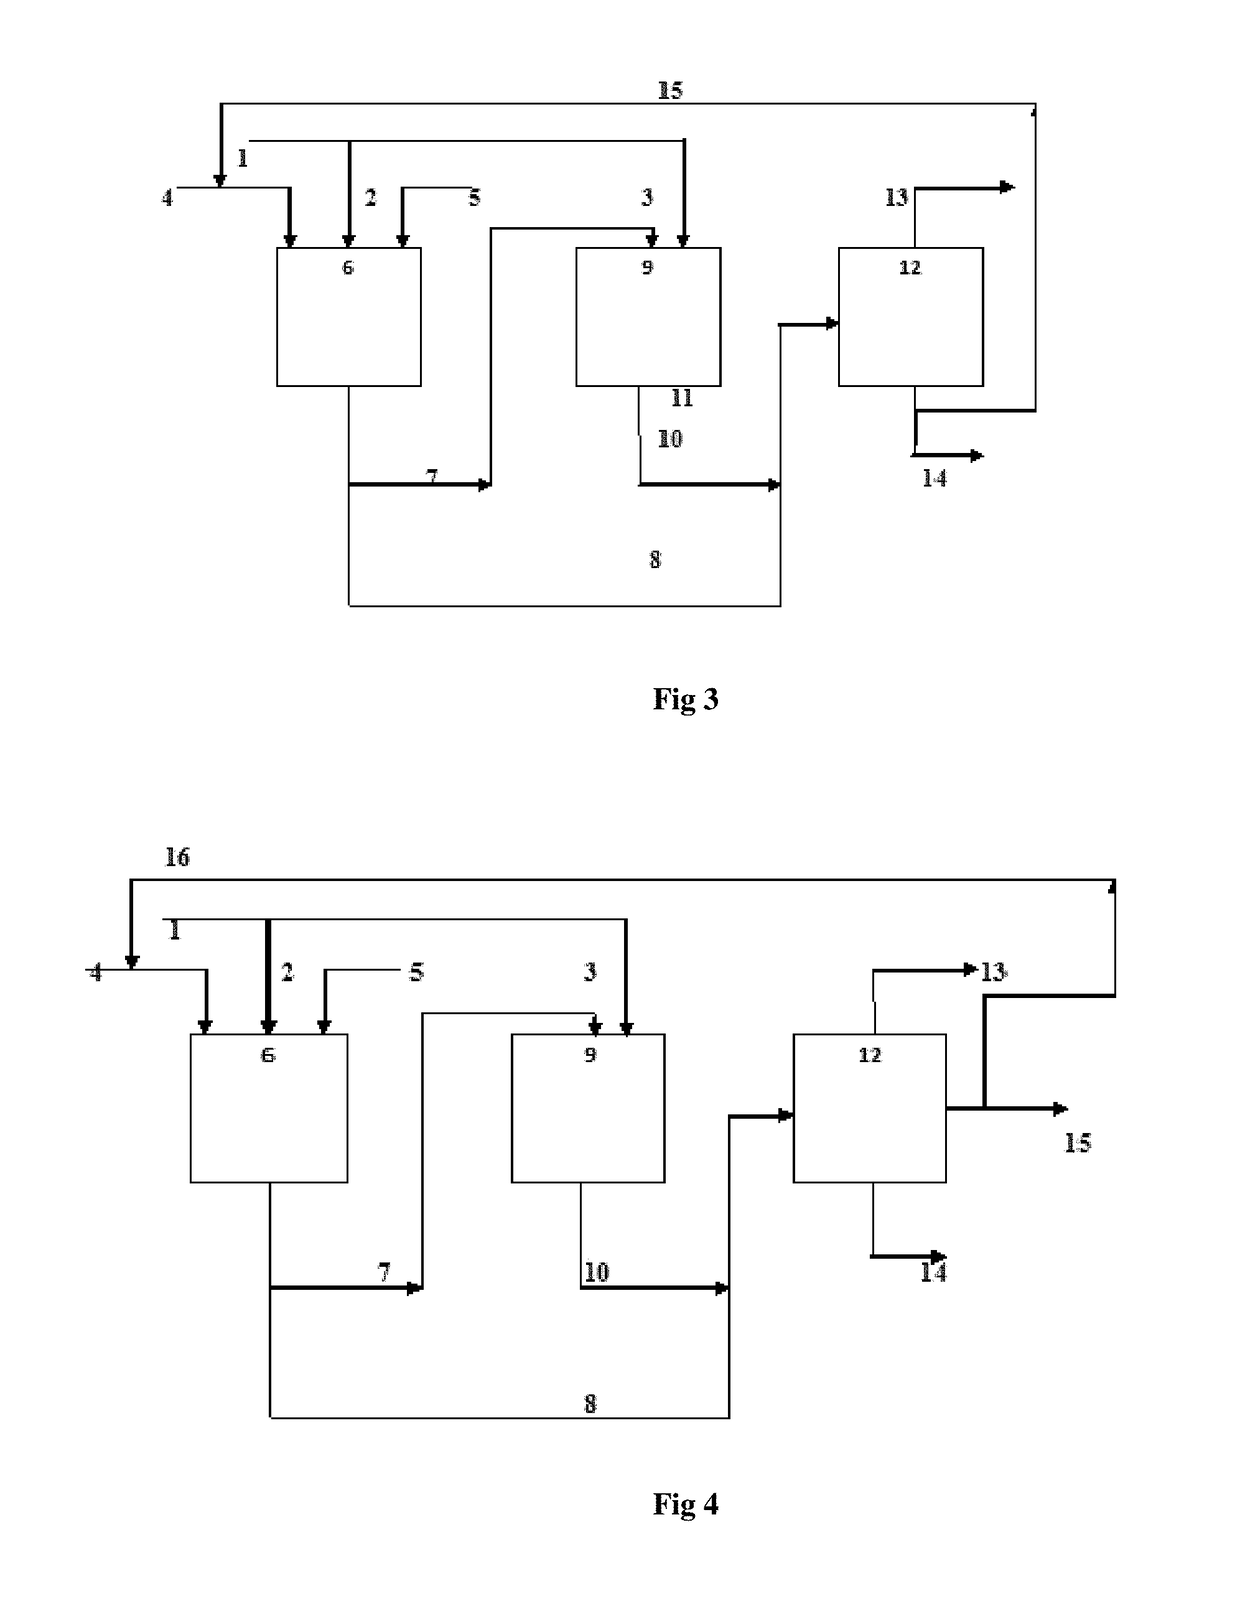 Process for simultaneous production of alcohols and oligomer product from hydrocarbon feed stock